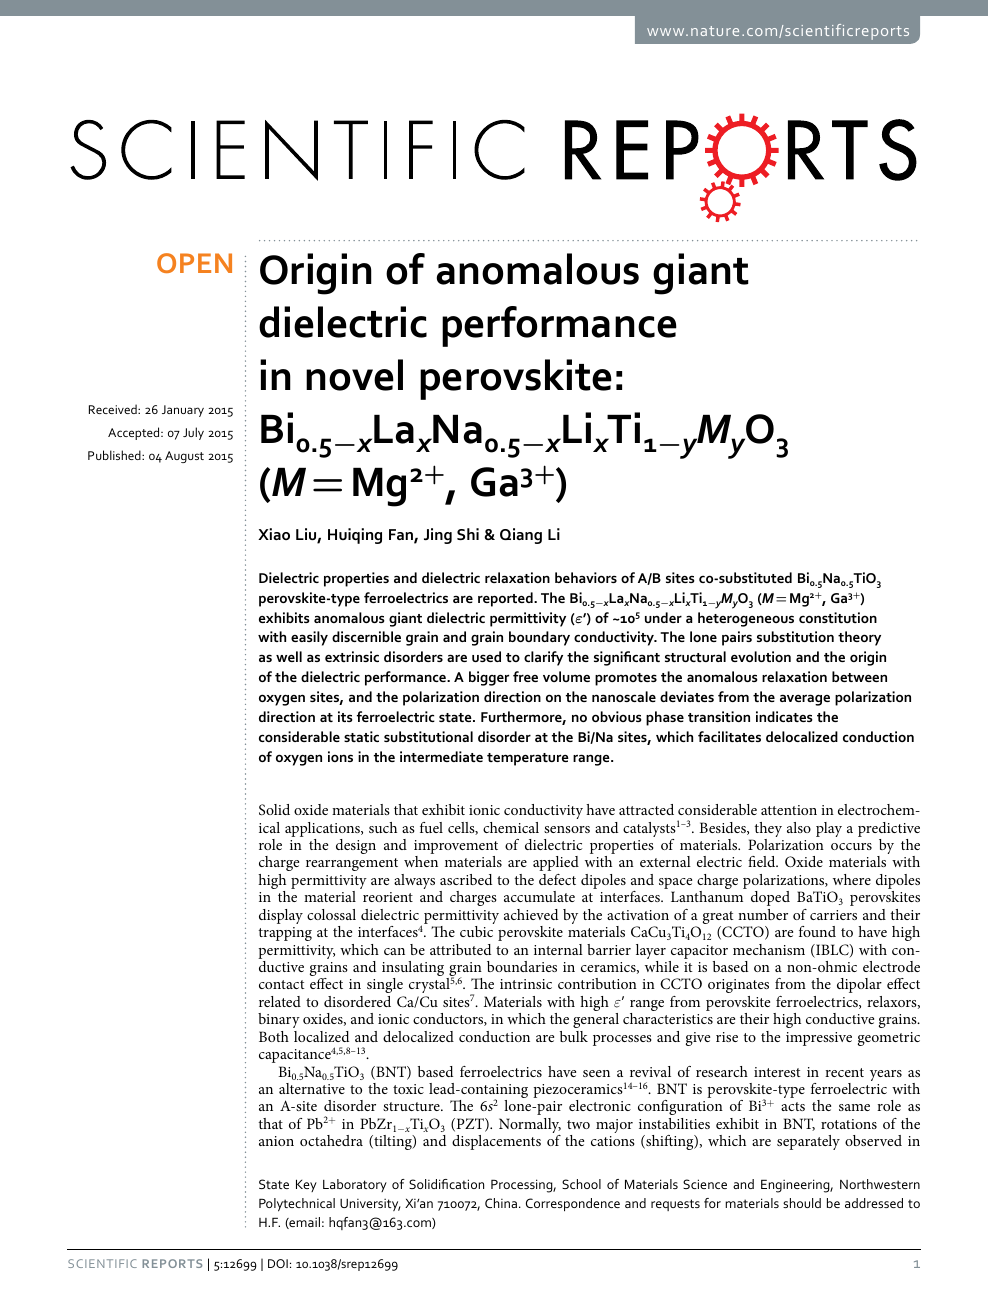 Origin Of Anomalous Giant Dielectric Performance In Novel Perovskite Bi0 5 Xlaxna0 5 Xlixti1 Ymyo3 M Mg2 Ga3 Topic Of Research Paper In Nano Technology Download Scholarly Article Pdf And Read For Free On Cyberleninka Open